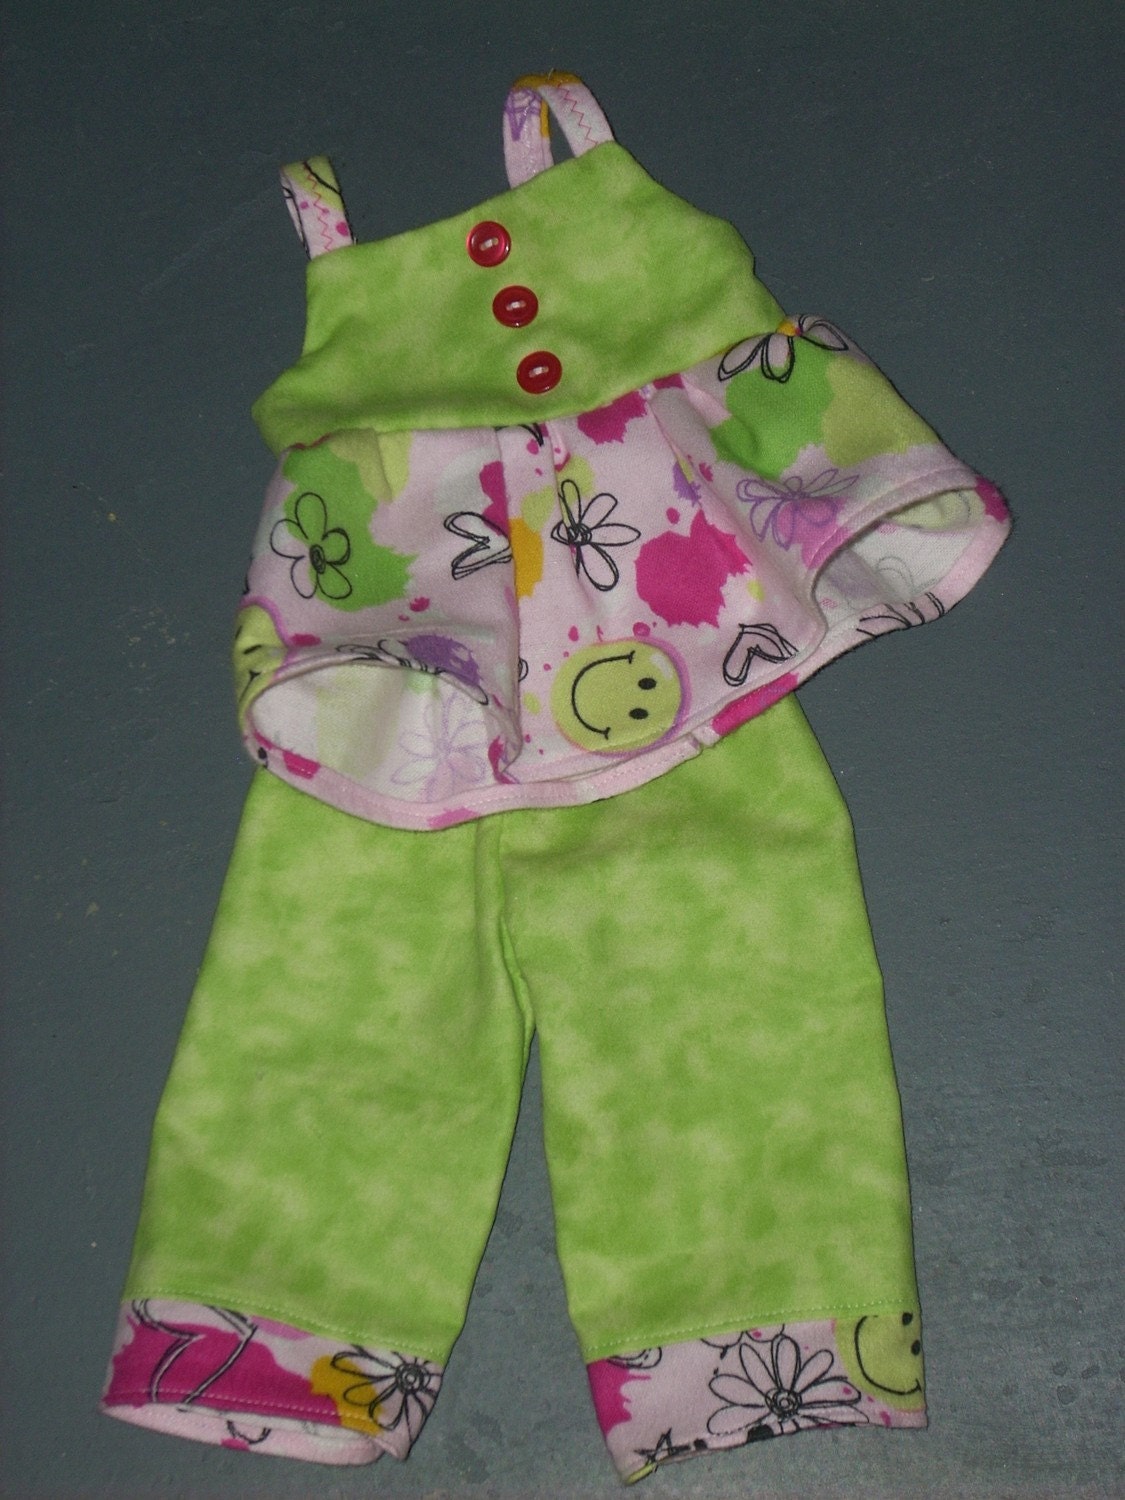 Smiley face DOLL PAJAMAS fit 18 inch dolls